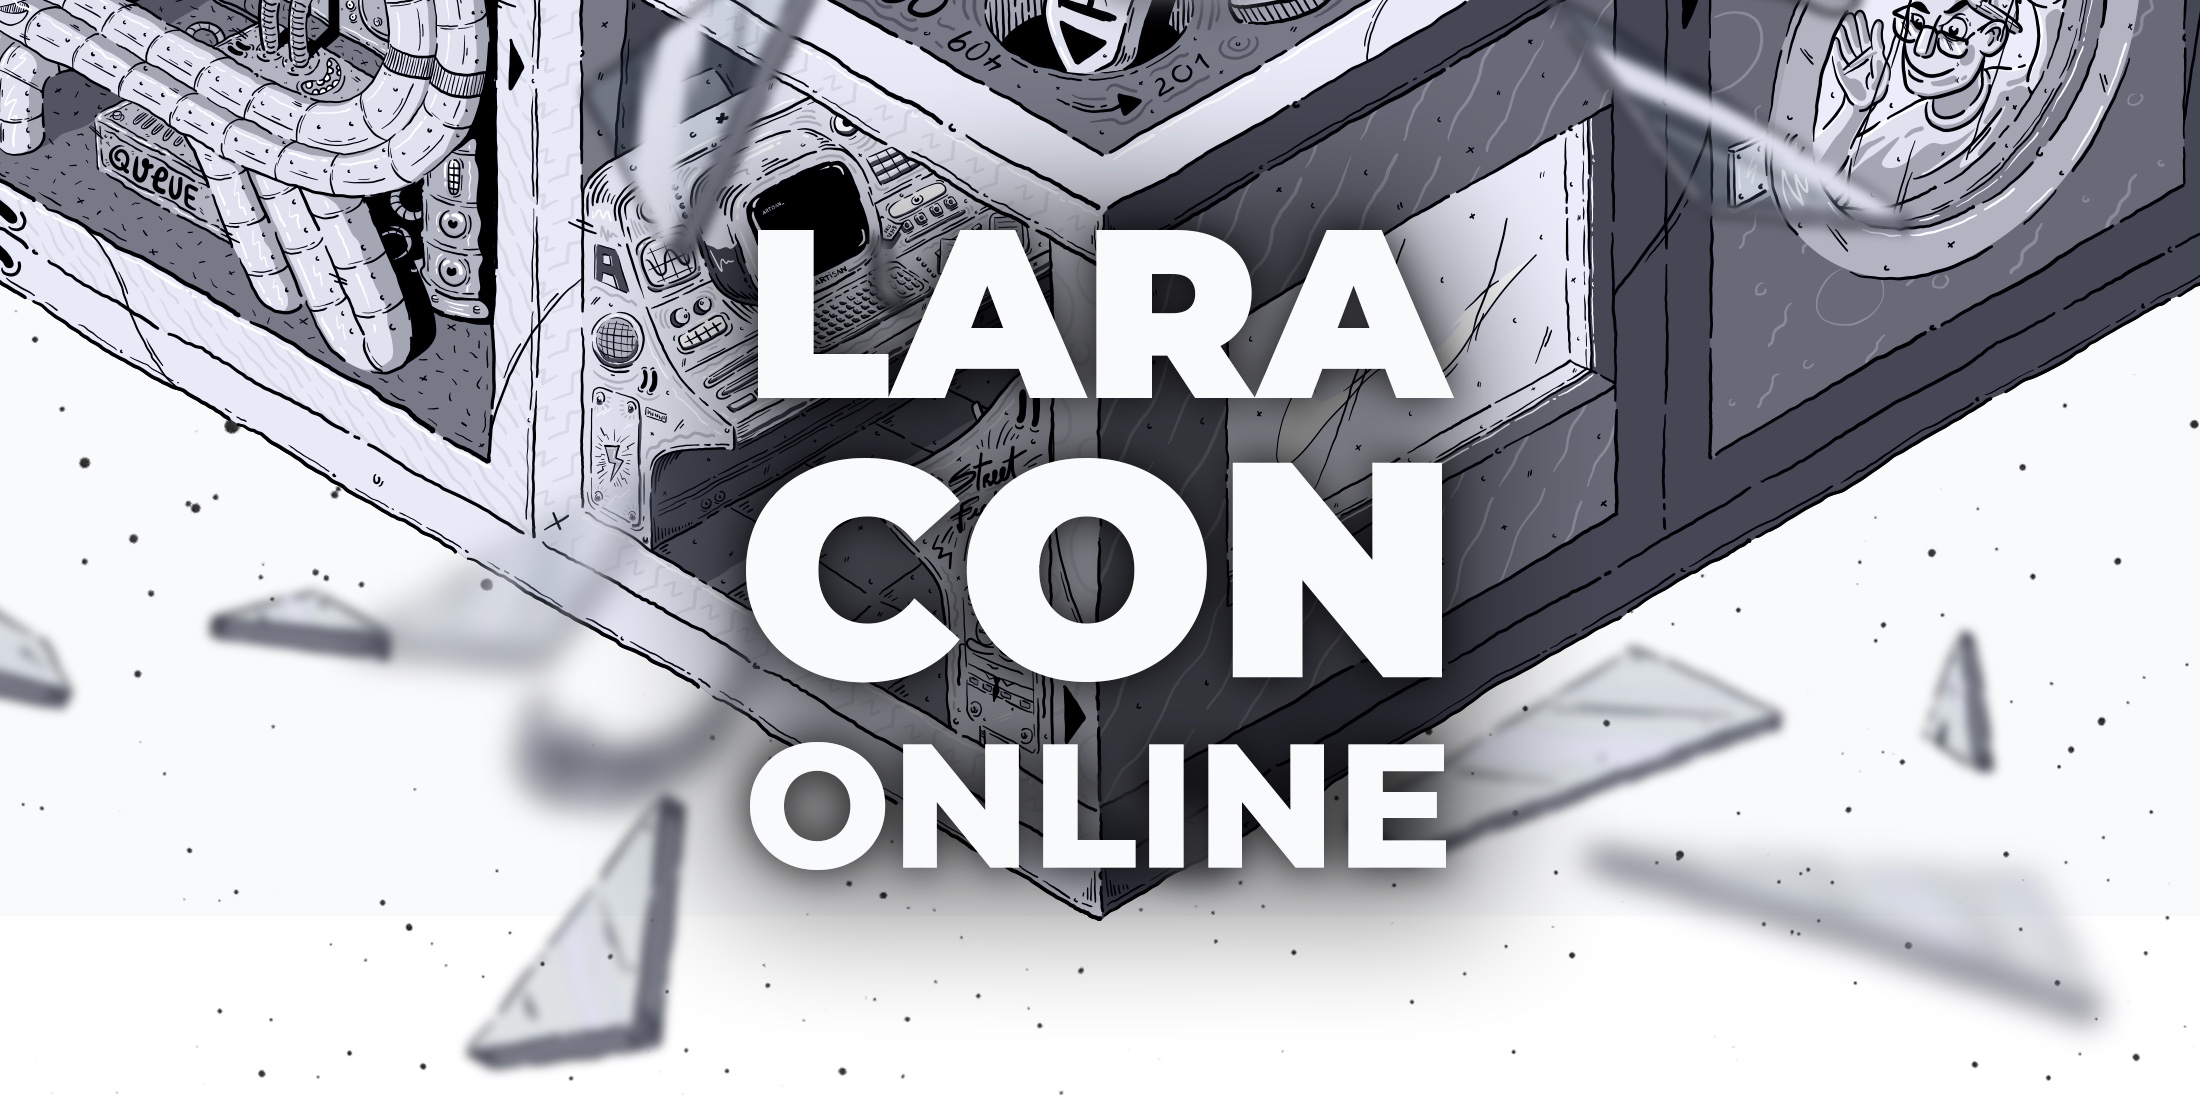 The secrets behind the Laracon Online site image